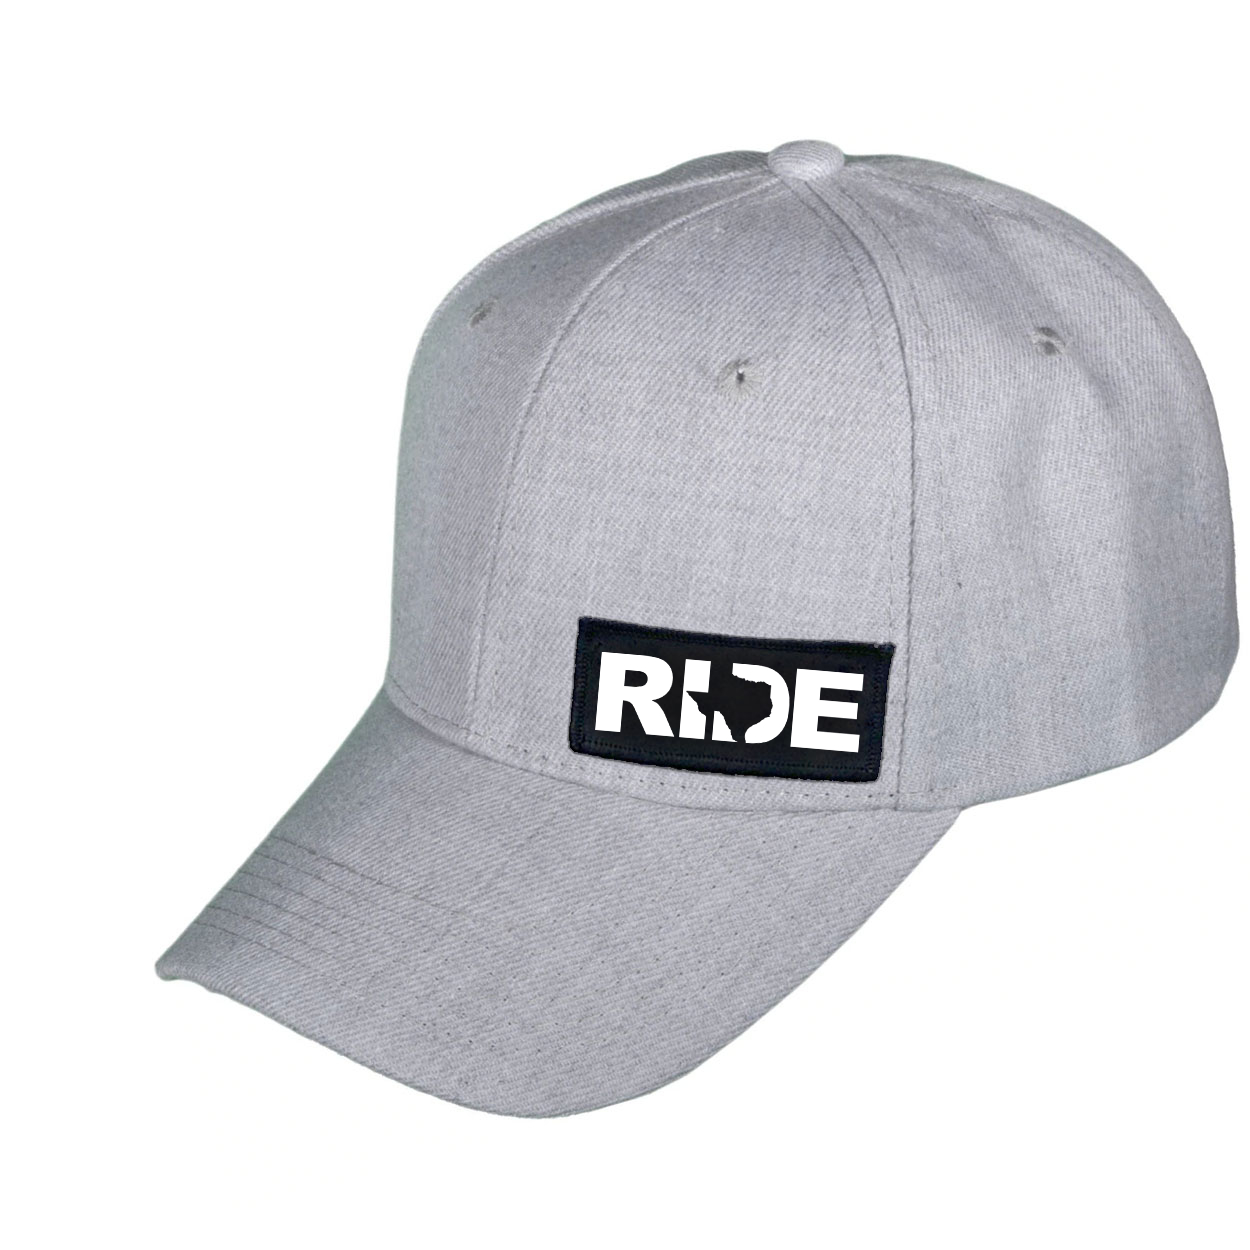 Ride Texas Night Out Woven Patch Velcro Trucker Hat Heather Gray 